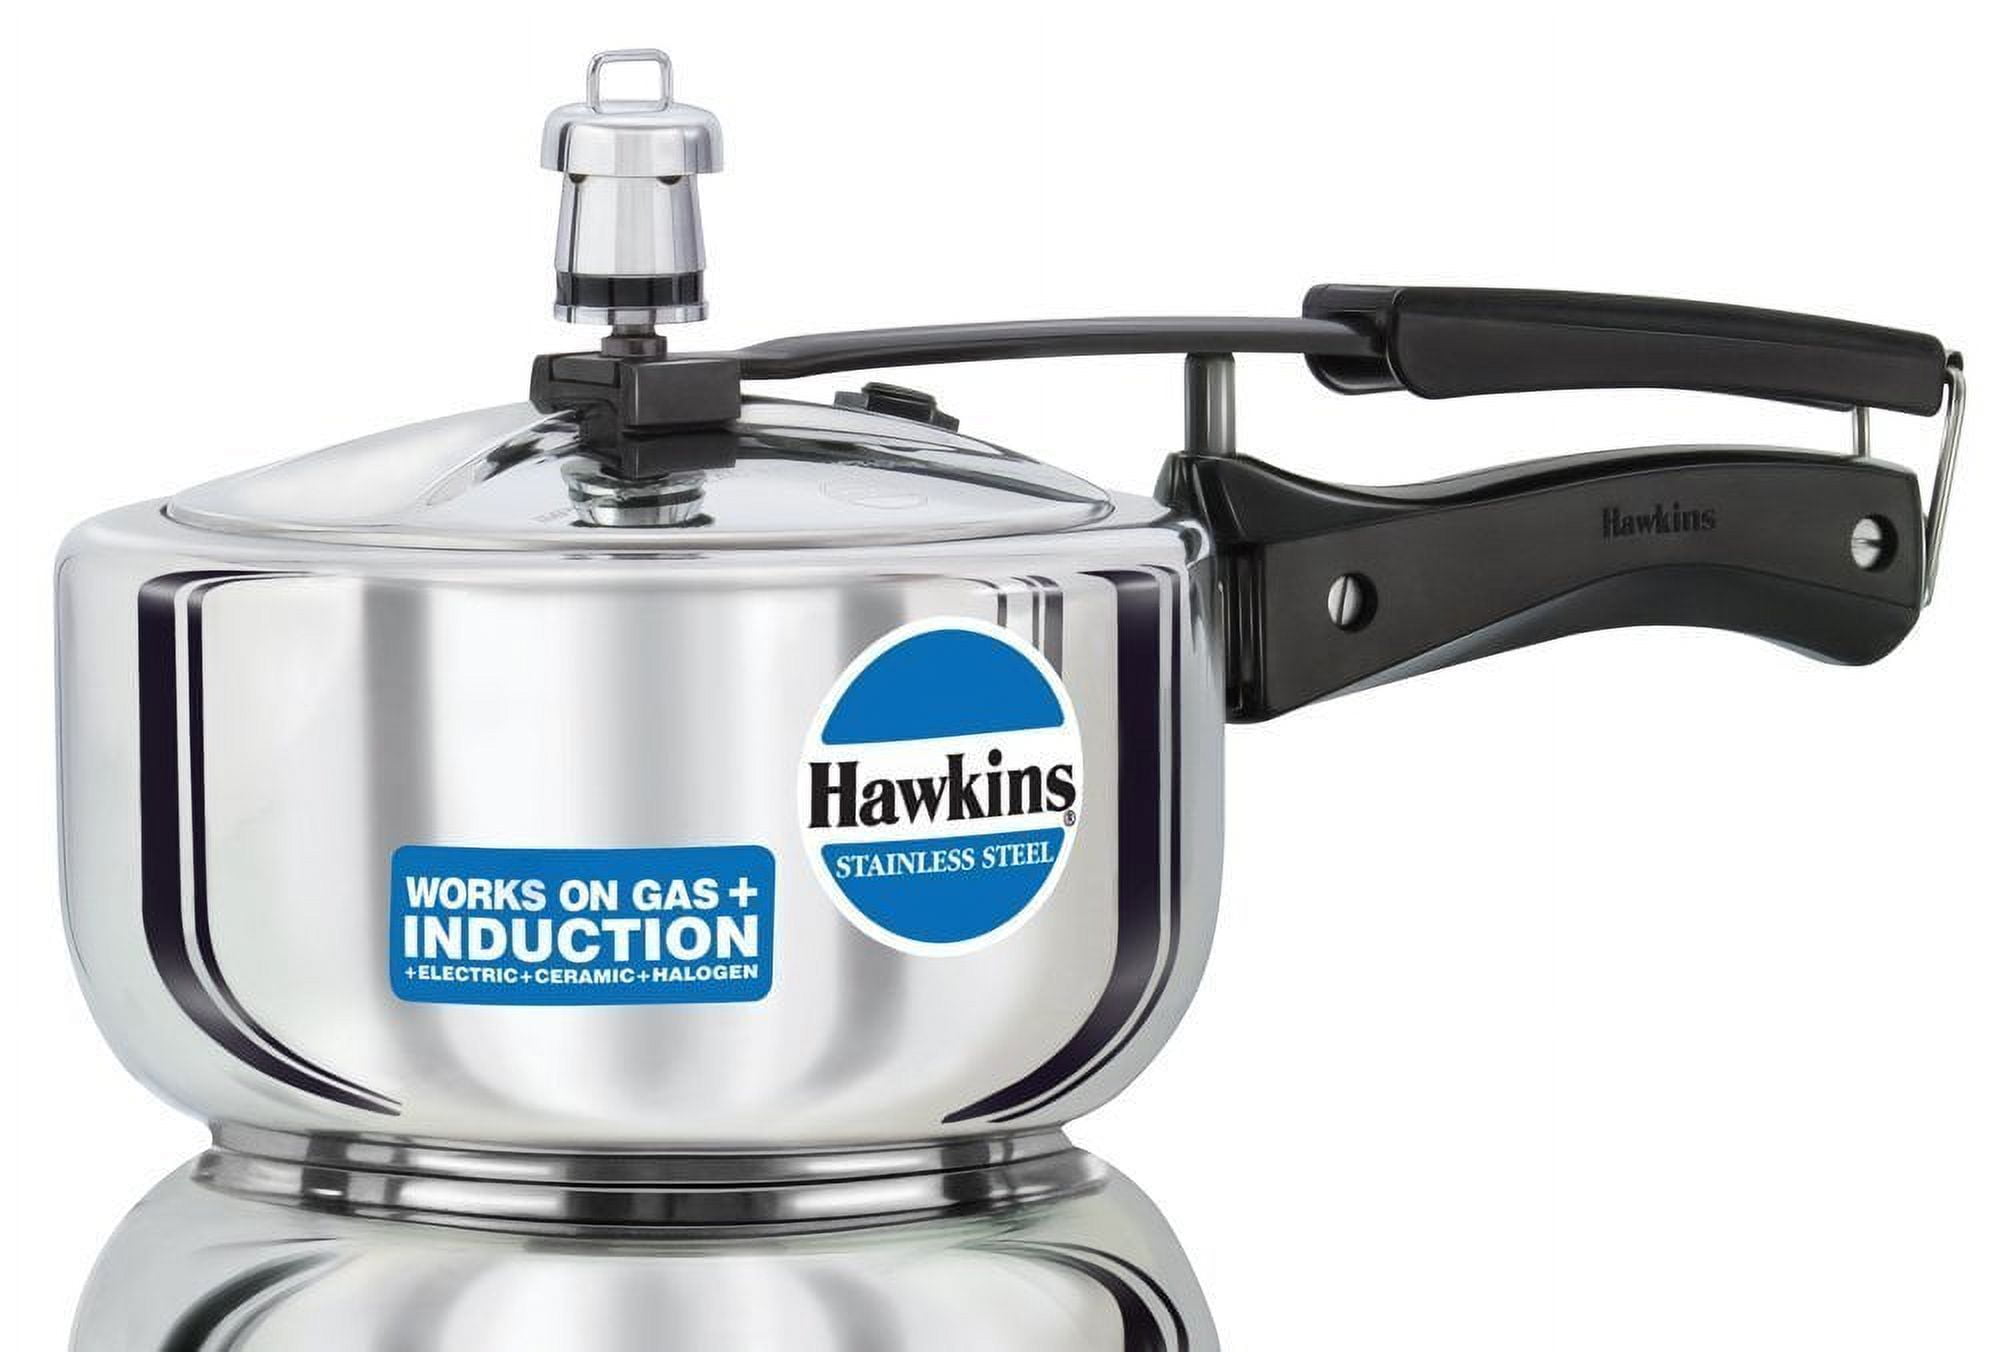 Hawkins Hevibase IH80 8-Litre Induction Pressure Cooker, Small, Silver 